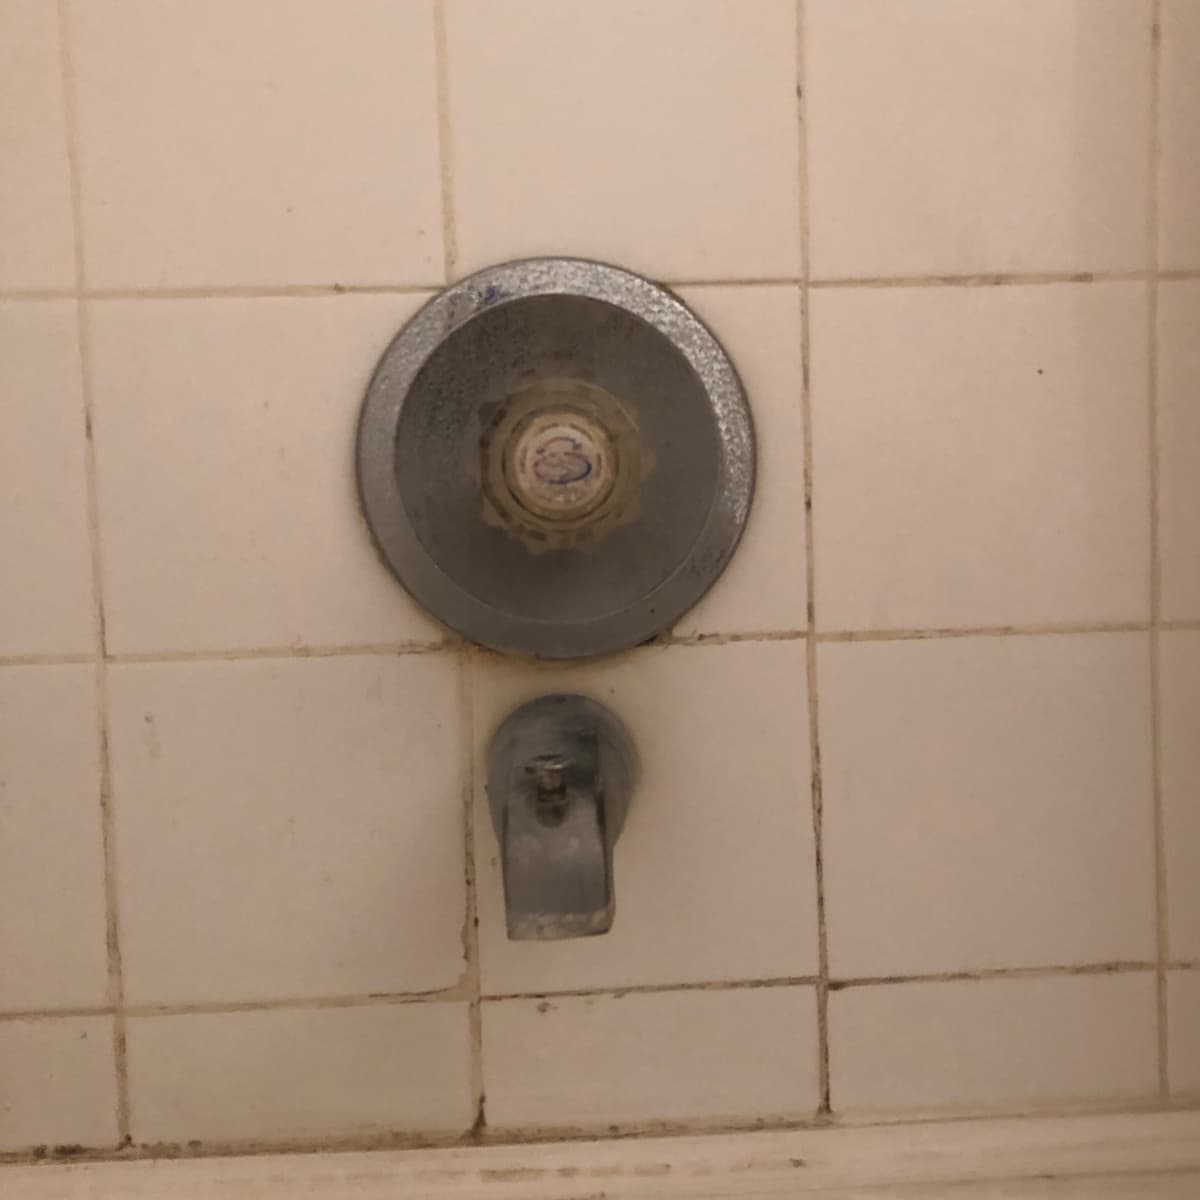 Replace A Single Handle Shower Valve, How To Replace Bathtub Faucet Stem